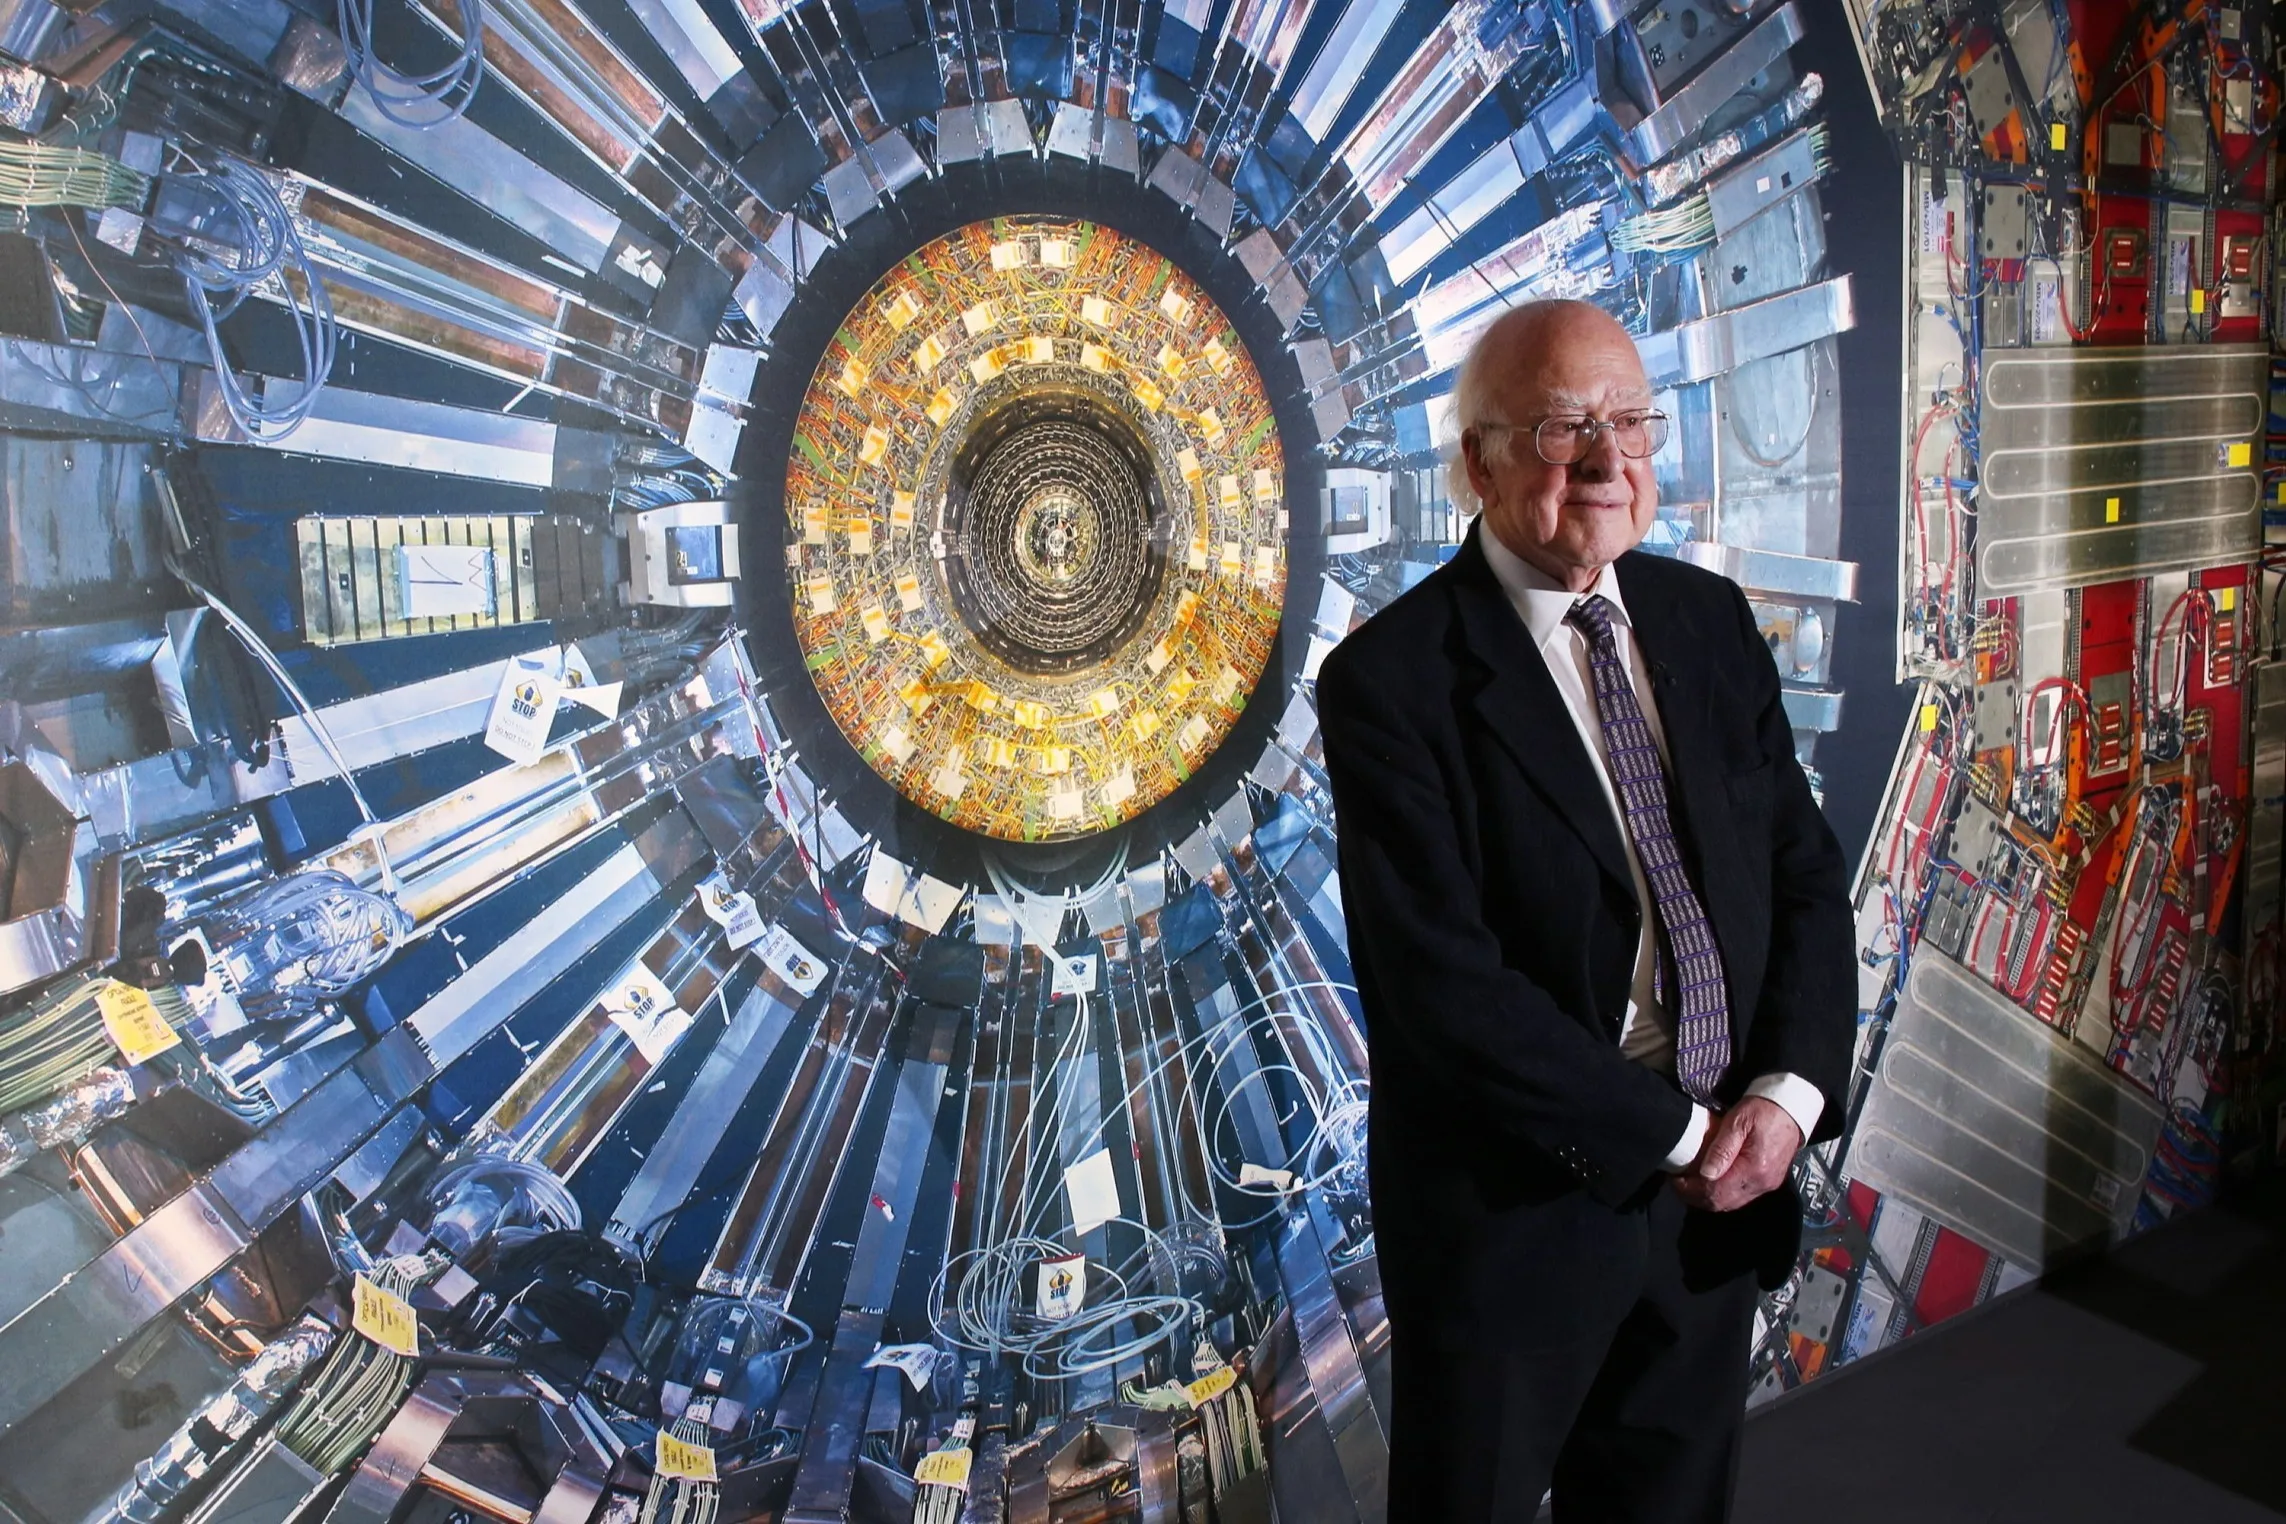 A man in a suit stands in front of a photograph of the Large Hadron Collider at the科學Museum 